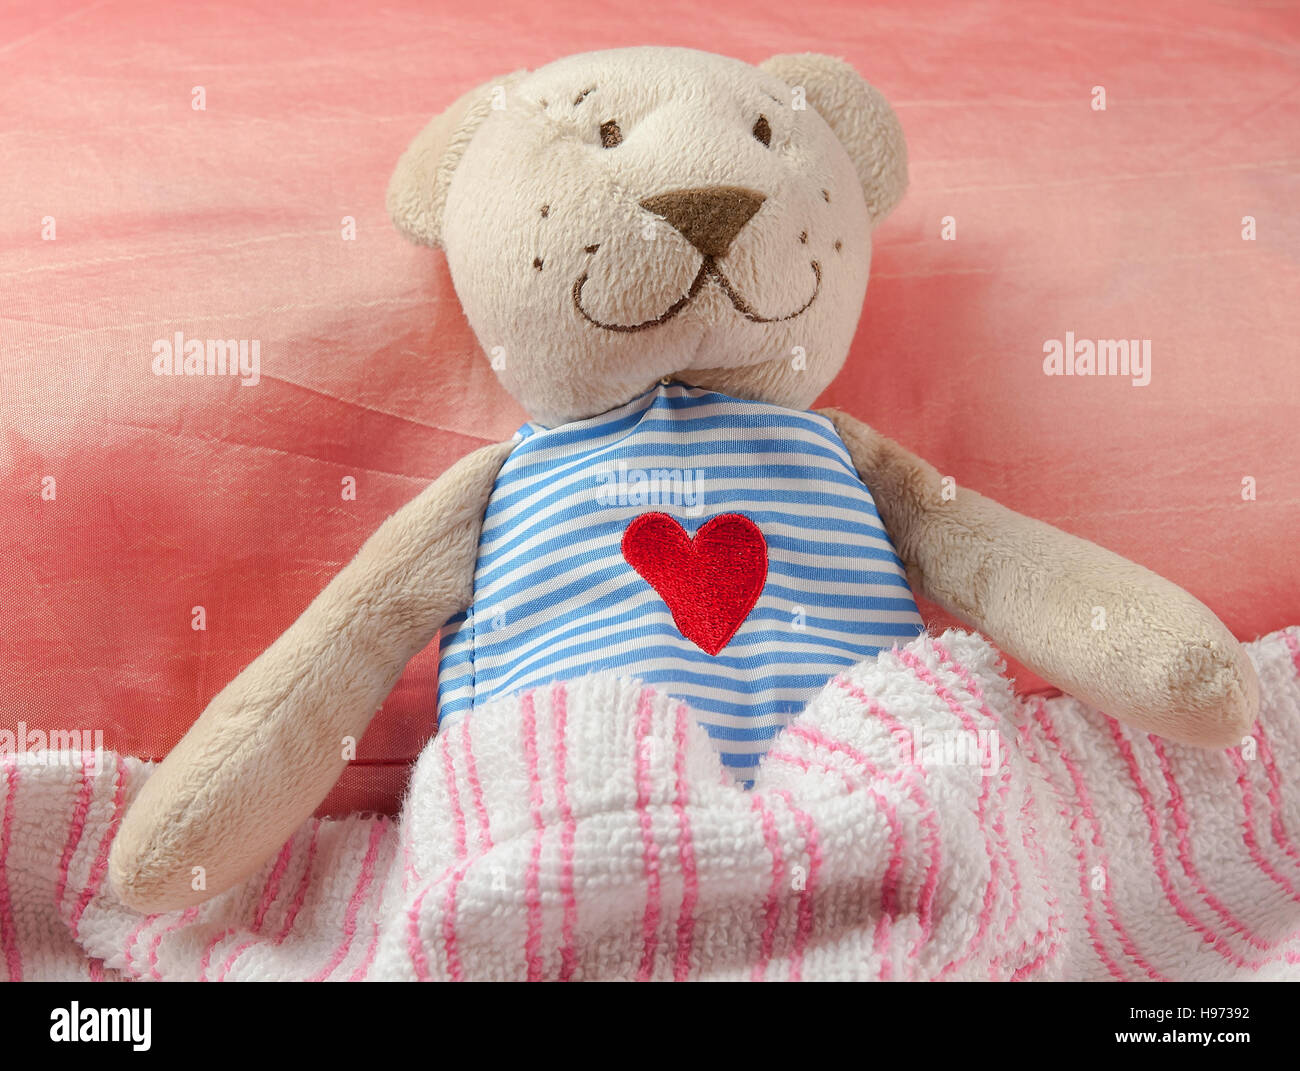 adorable teddy bear laying in bed, under the sheets. Stock Photo